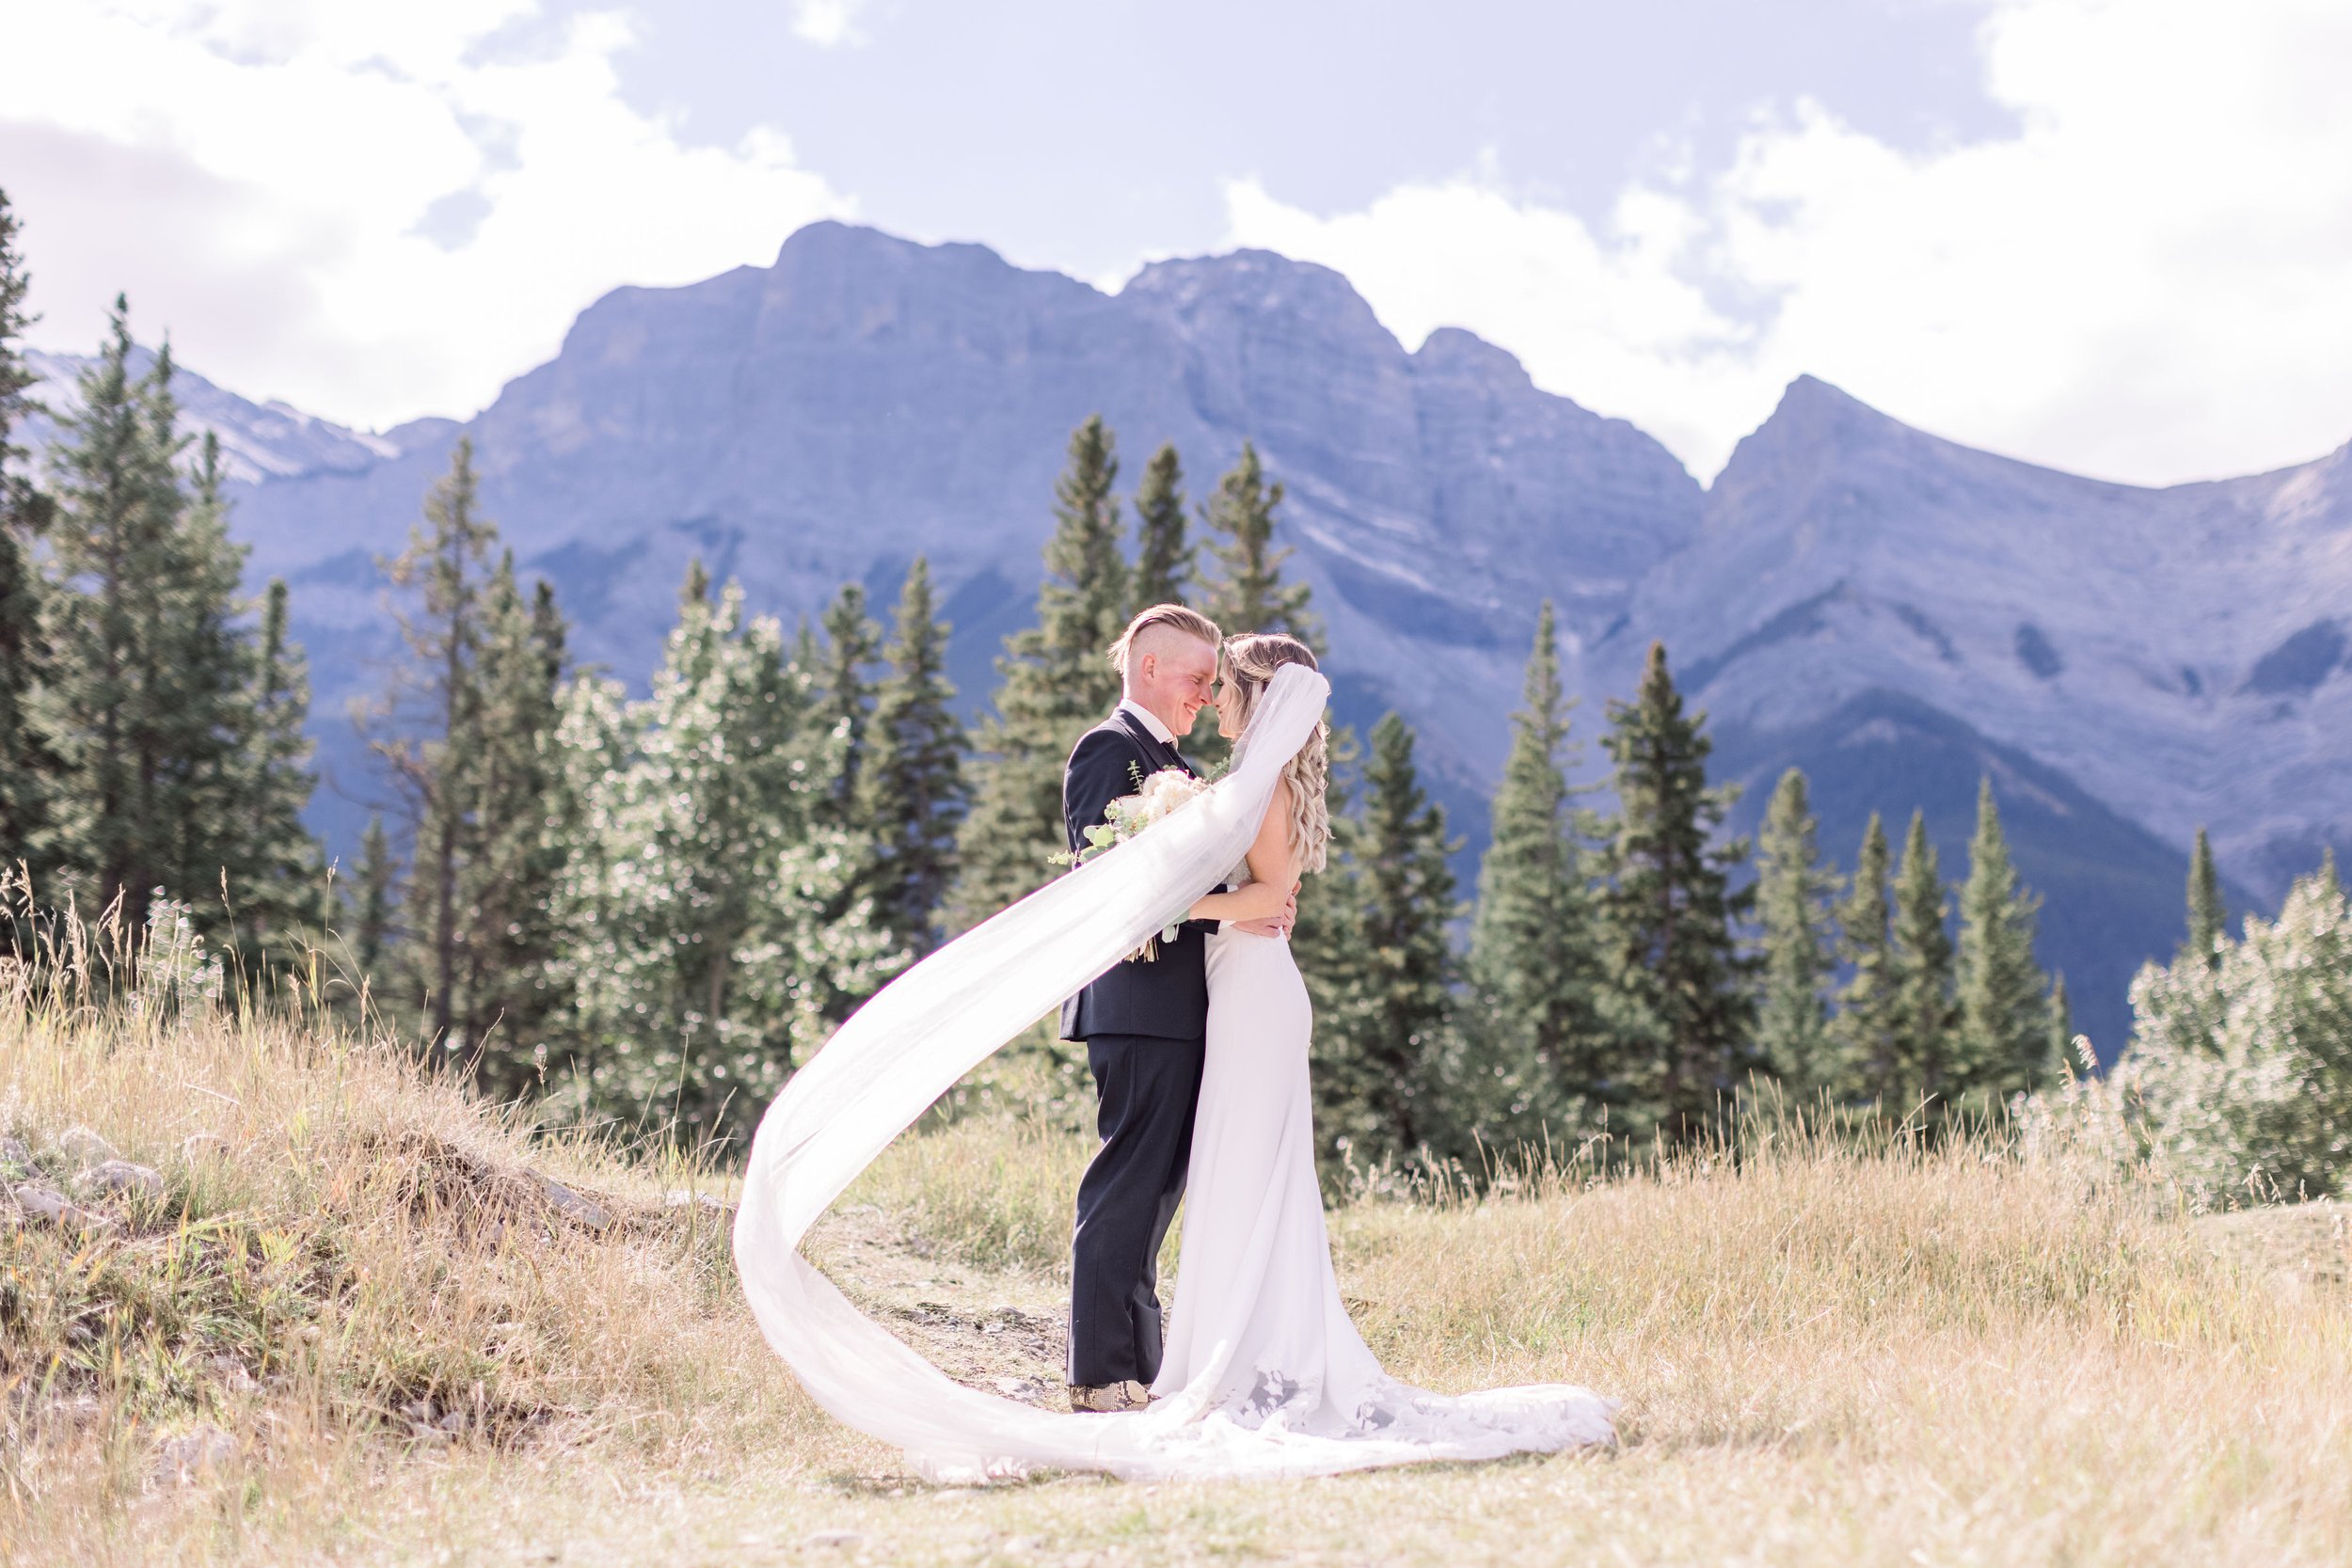  Under the Banff mountains, a bride's veil blows in the wind while kissing her groom by Chelsea Mason Photography. veil Banff #Albertaweddings #shesaidyes #Albertaweddingphotographer #SilvertipGolfCourse #ChelseaMasonPhotography #ChelseaMasonWeddings